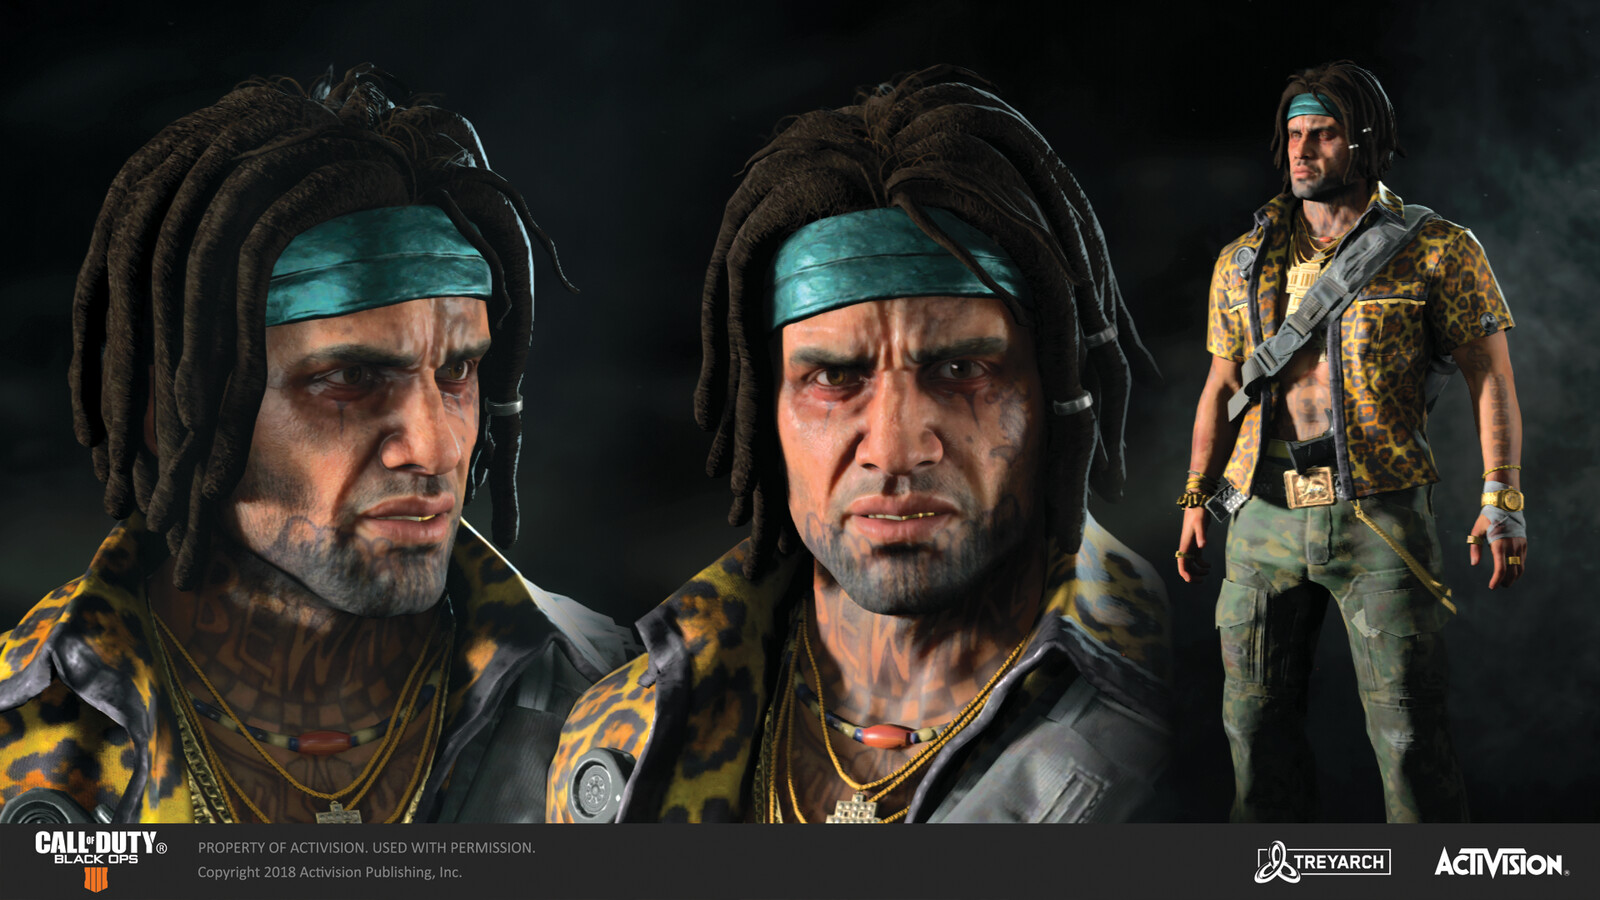 Responsible for texturing Crash's face/body tattoos for the 'Snitch' skin released for the Grand Heist DLC. Concept by John Liew, body modeled by our external partners, in collaboration with the talented artists at Treyarch. Head model by Loudvik Akopyan.